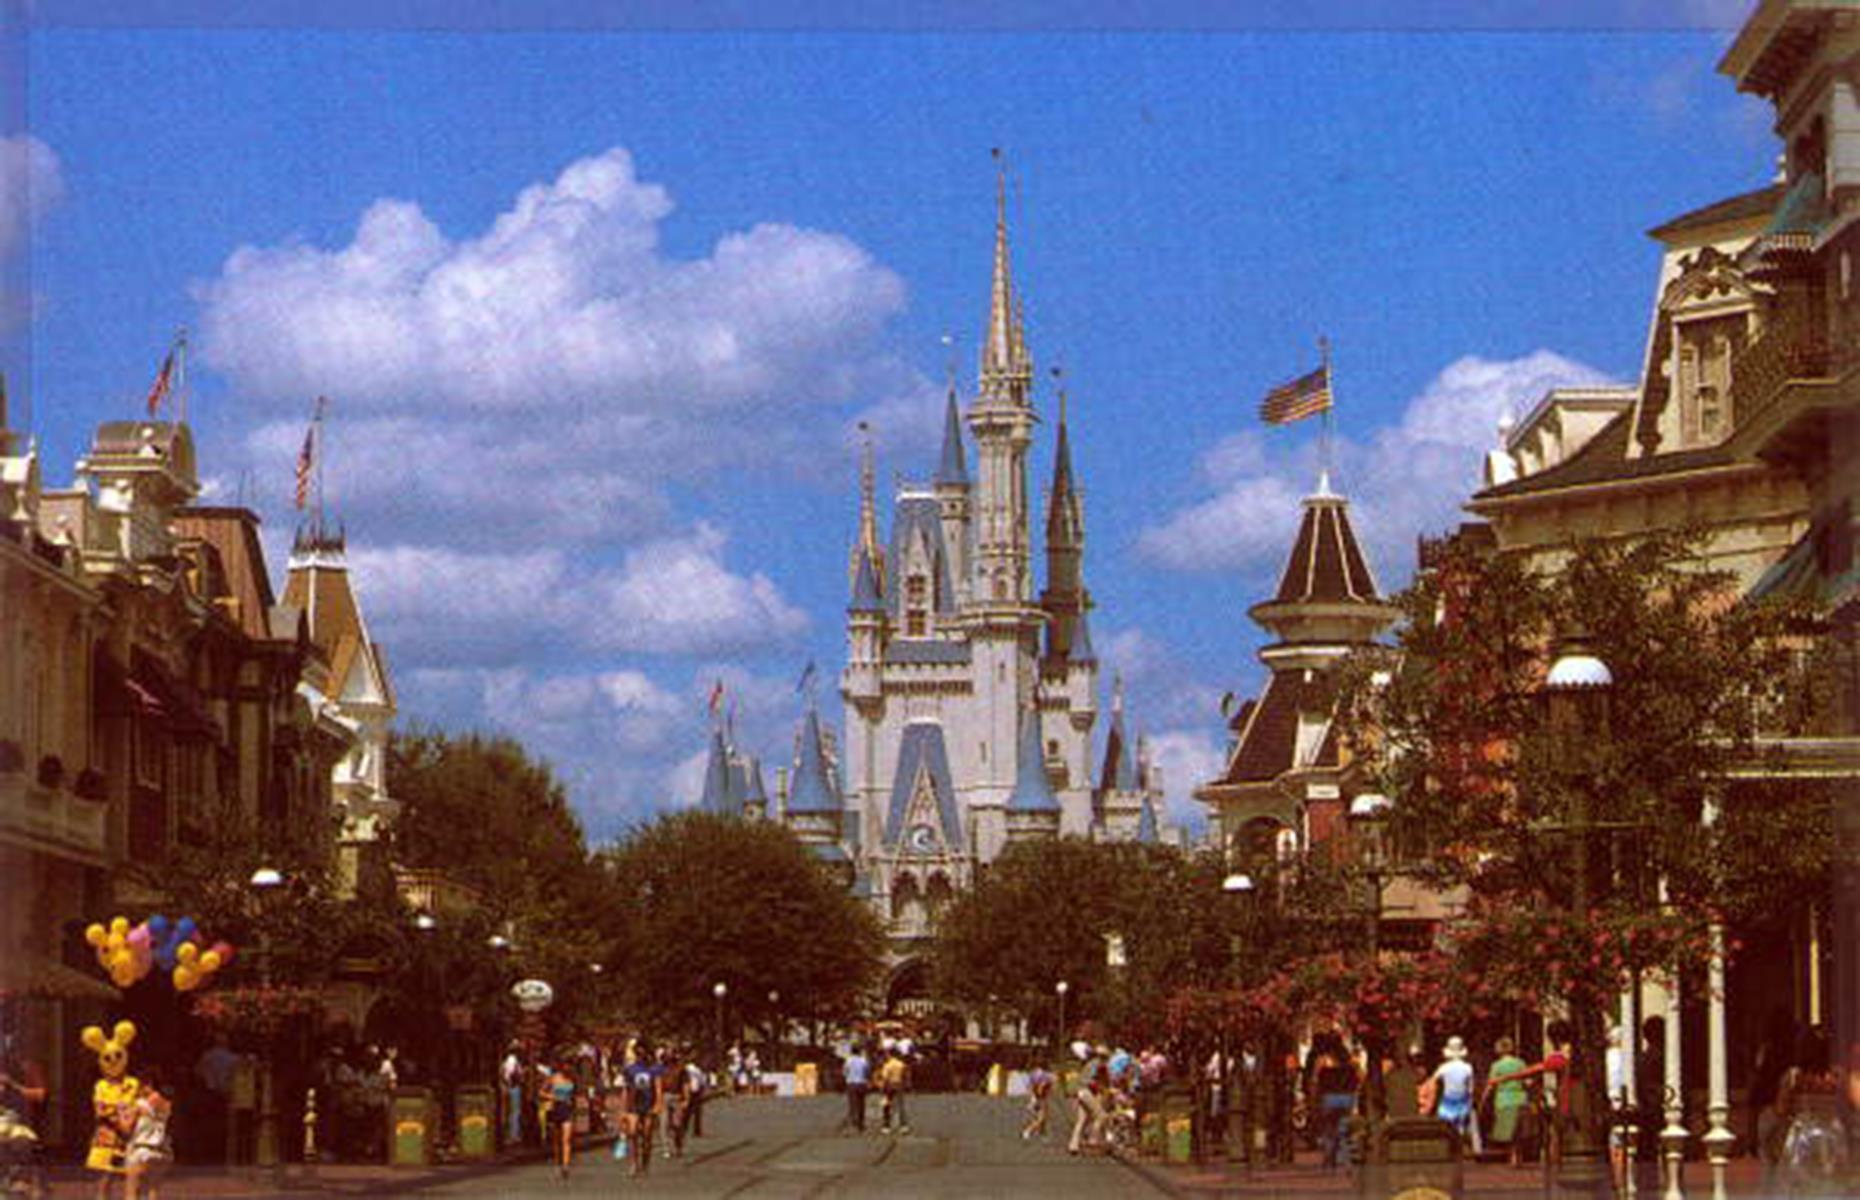 In a moment that revolutionized Florida’s tourism industry, the gates to Walt Disney World Resort were finally opened on 1 October 1971, several years after Walt Disney had initially purchased land in the vast swamplands of Orlando and Kissimmee. It welcomed 10,000 eager fans. Initially, it had six individually-themed lands: Main Street USA, Adventureland, Fantasyland, Frontierland, Liberty Square and Tomorrowland. Sadly its creator, Walt Disney, didn’t live to see his creation.